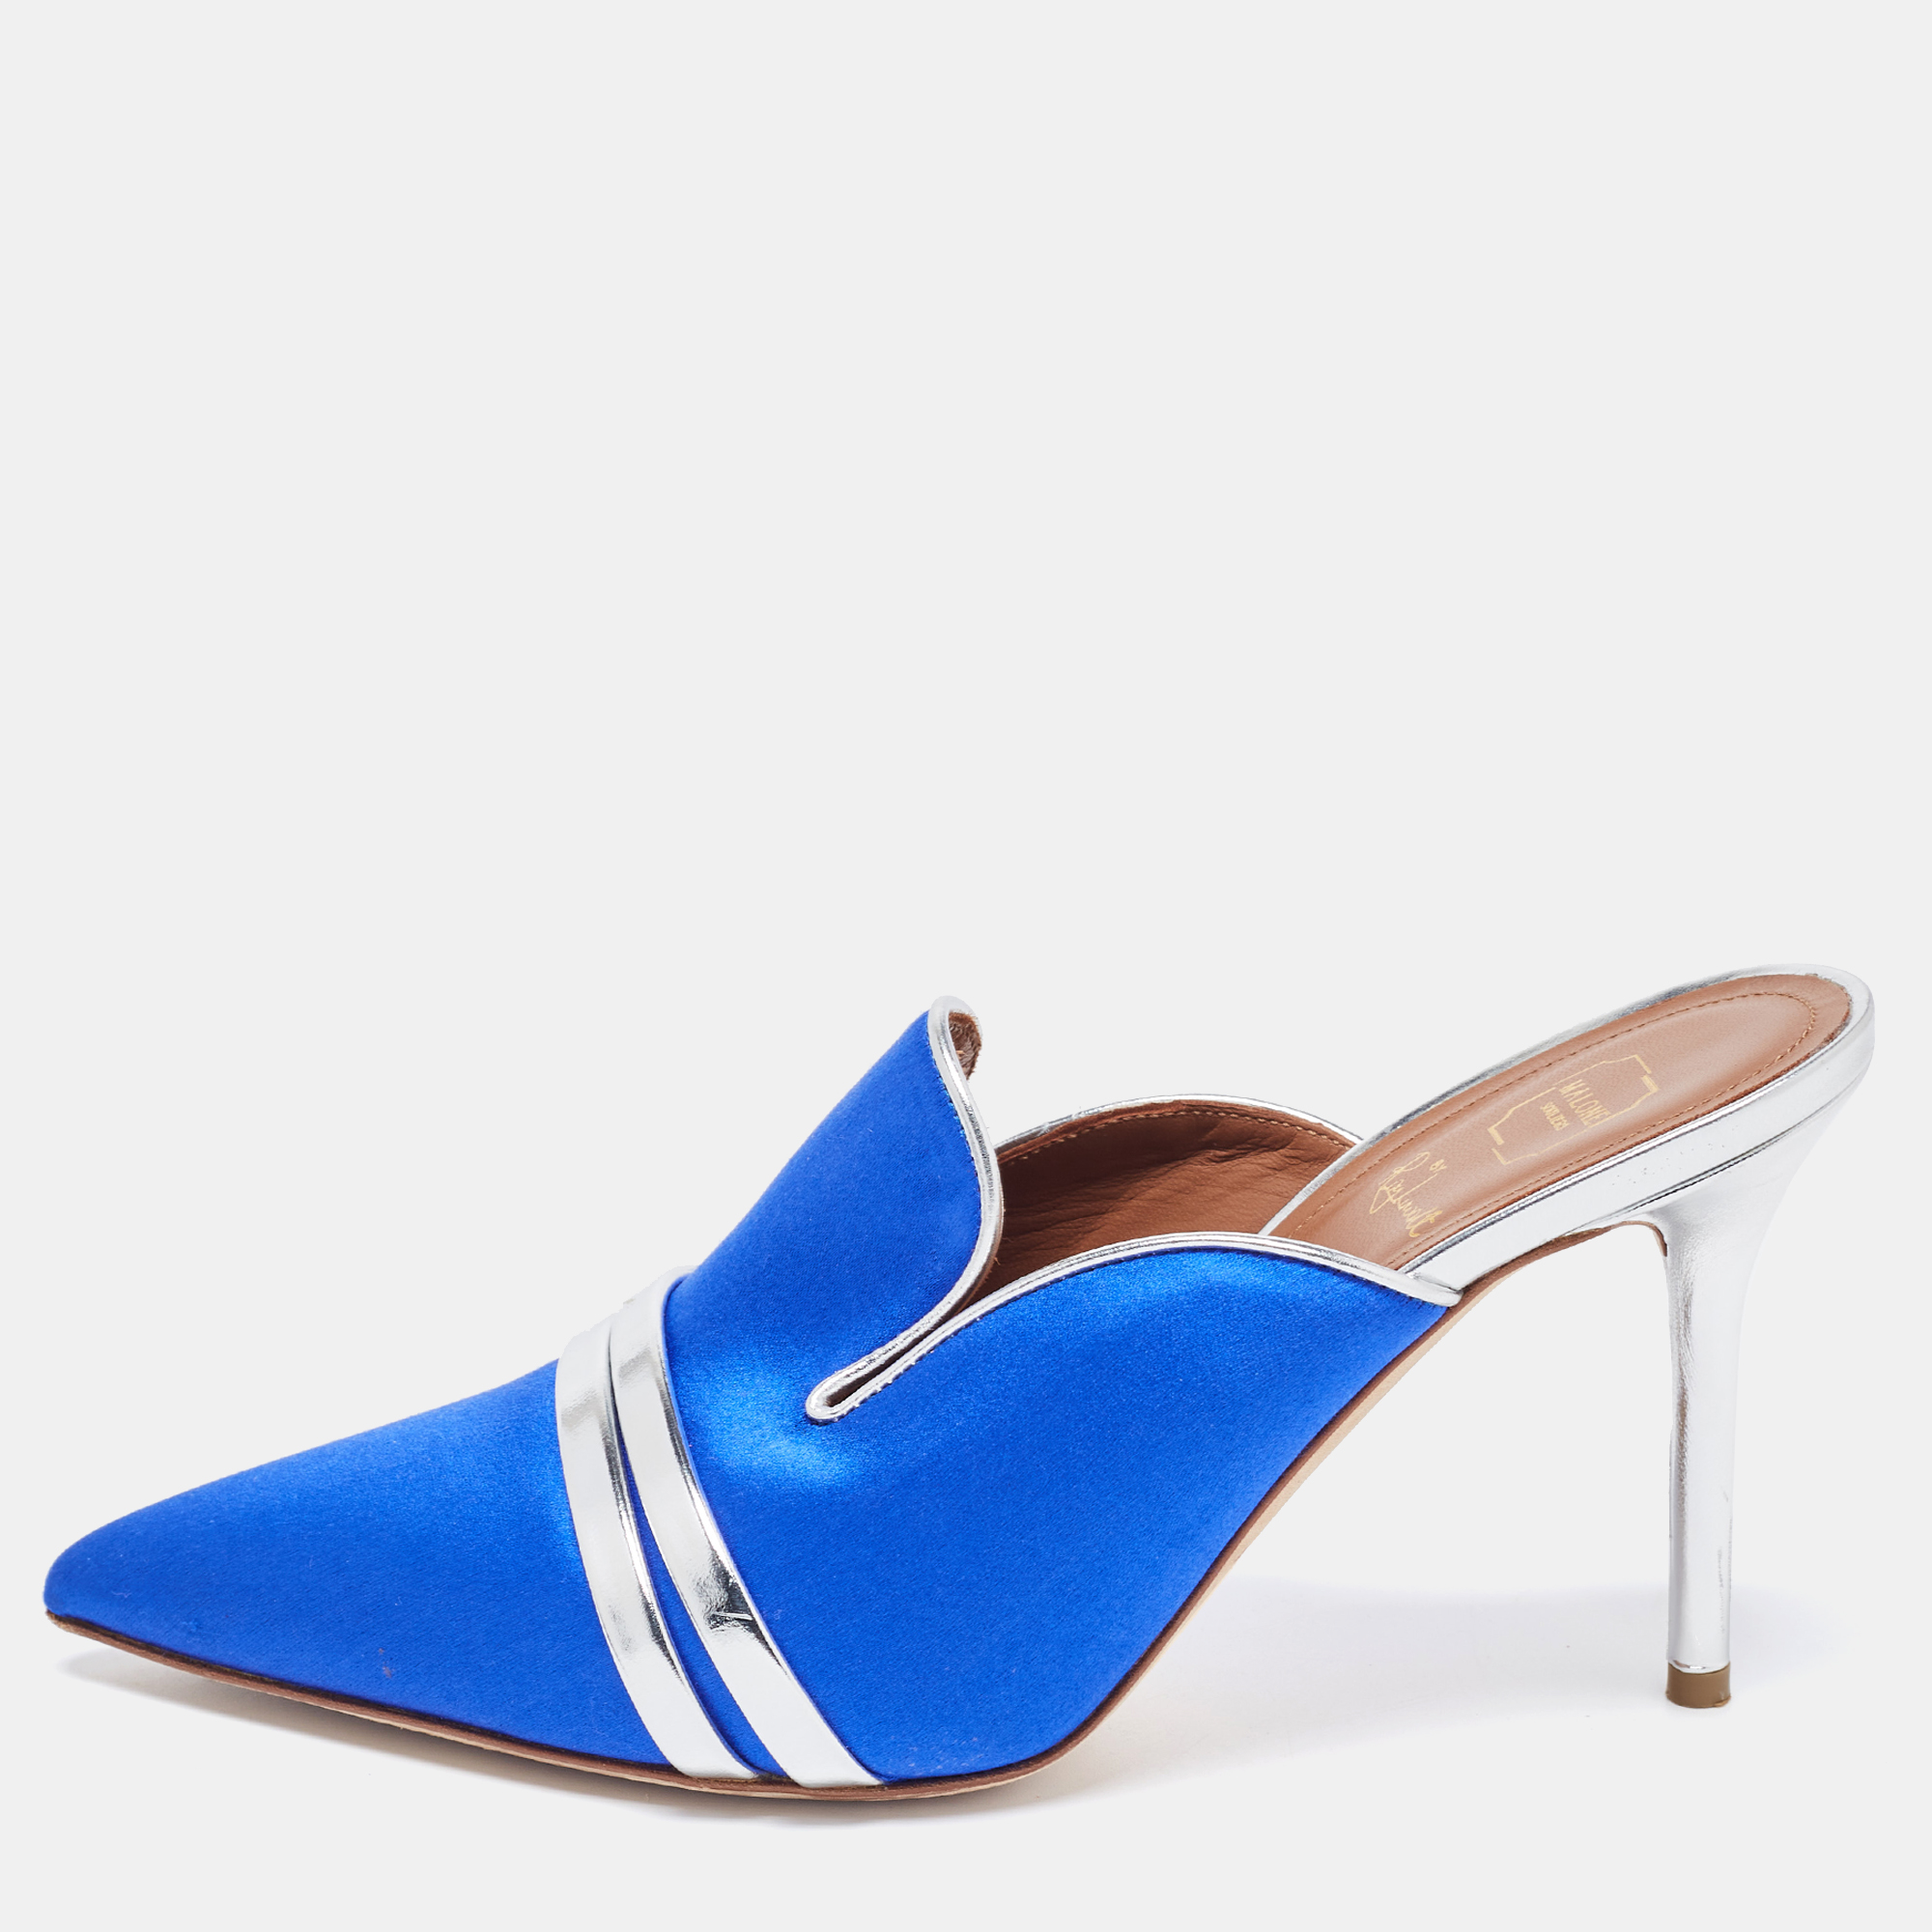 Malone souliers by roy luwolt blue/silver satin and leather hayley mules size 38